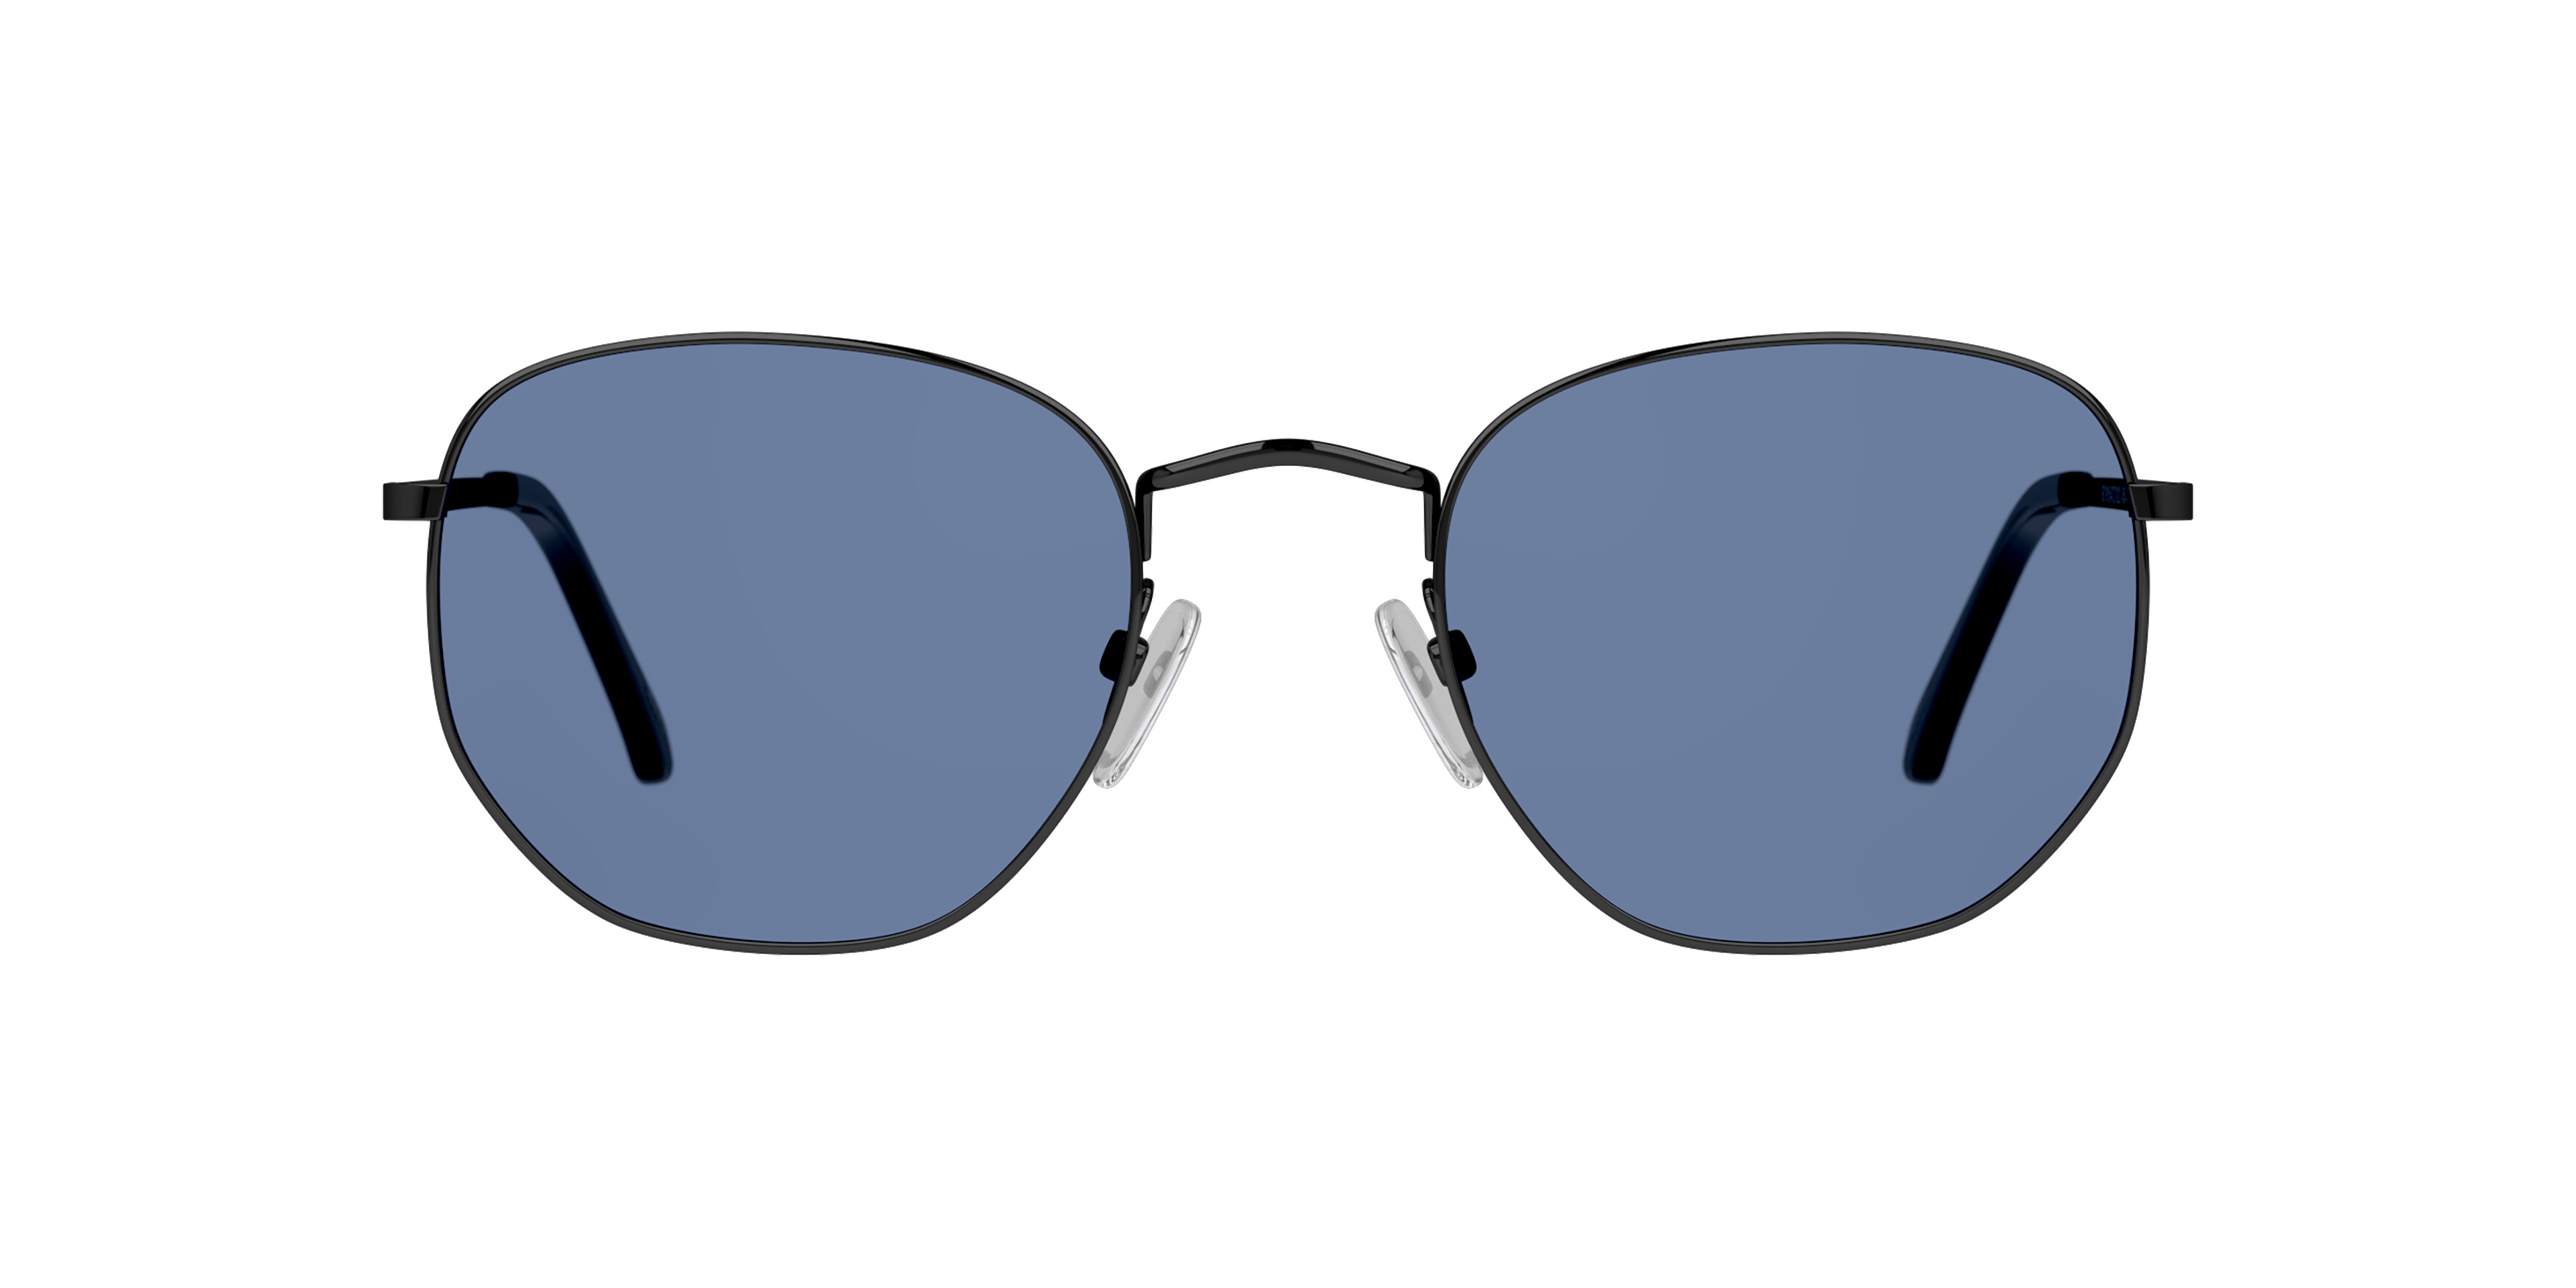 [products.image.front] Seen SNSU0021 BBC0 Sonnenbrille